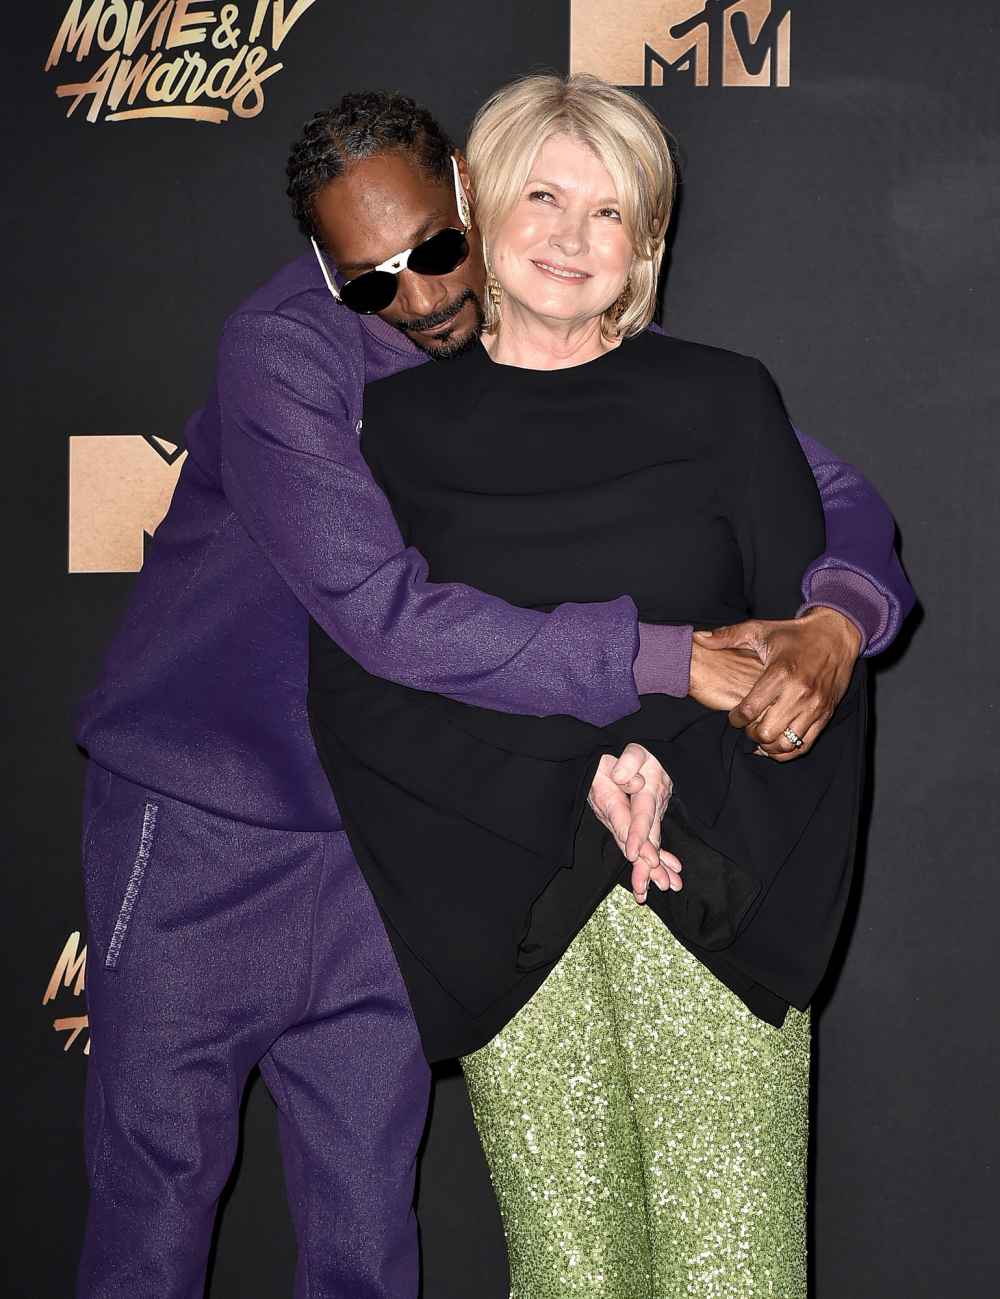 Martha Stewart and Snoop Dogg Recreate Iconic ‘Titanic’ Scene to Promote Their Cooking Show